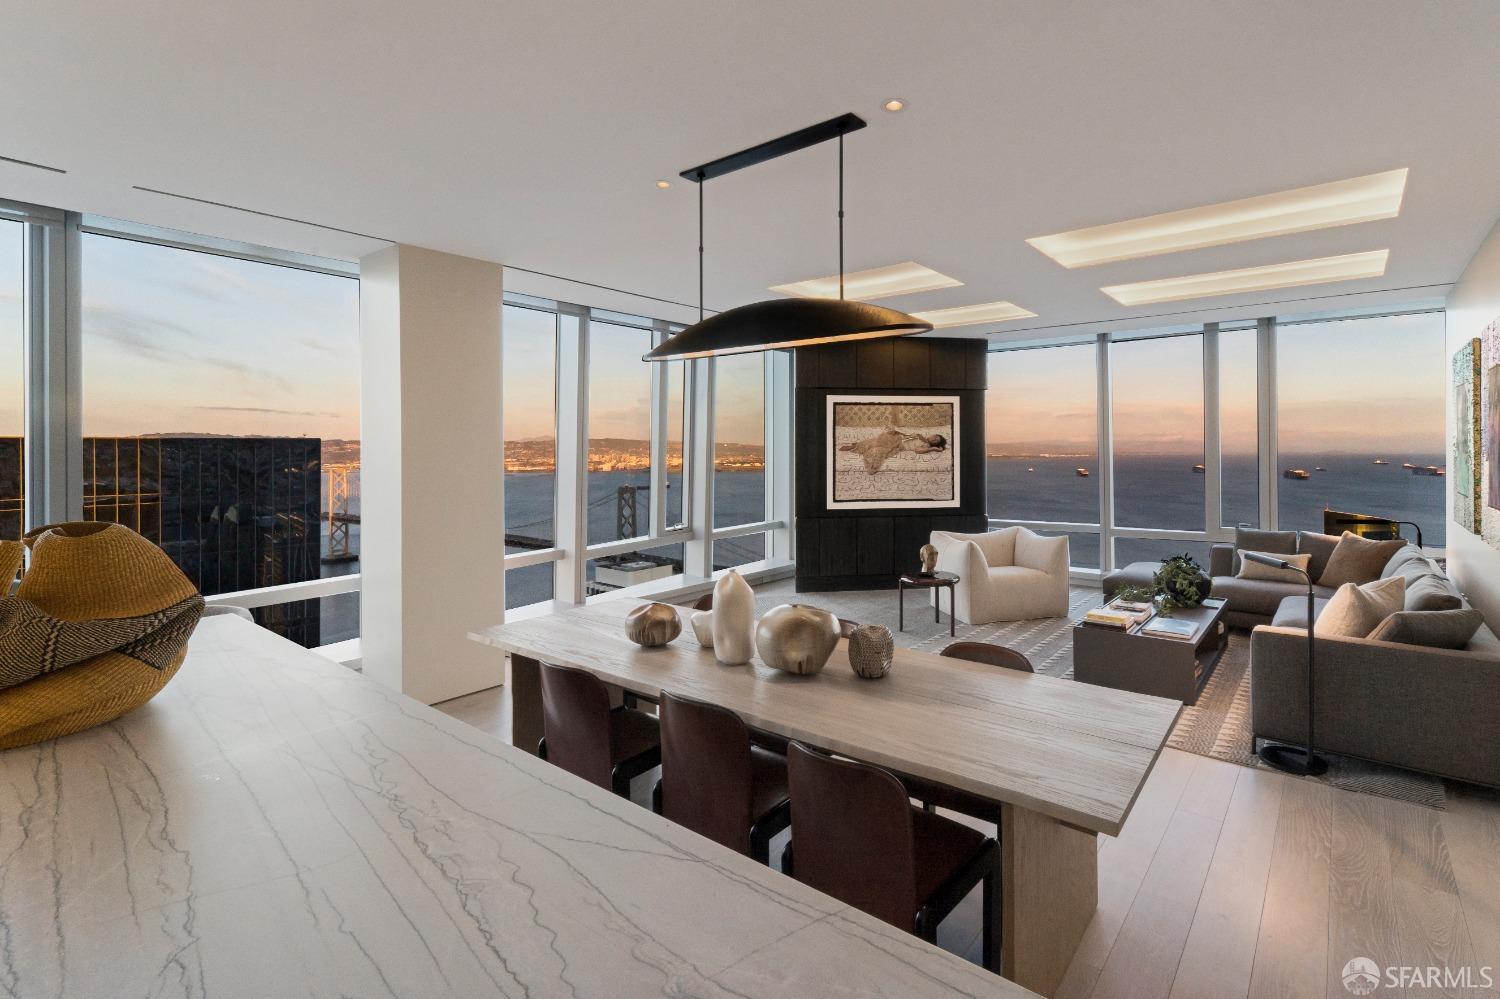 Welcome to Residence 62B, the final 3-bedroom, 3.5 Bath B floor plan at 181 Fremont. This magnificent 2,263 square foot residence is perched 580 feet above ground, treating you to breathtaking panoramic vistas of the city, the iconic Bay Bridge, and the lush expanse of Salesforce Park. Priced at $6,730,000 this luxurious home has been meticulously designed, showcasing the finest materials sourced from around the world. Revel in the beauty of French oak hardwood floors, an inviting open kitchen adorned with top-of-the-line Miele and Sub-Zero appliances, and a spa-like primary bathroom enveloped in the elegance of Arabescato Corchia marble.    Beyond its exceptional privacy and unrivaled views, 181 Fremont offers a host of premium amenities, including 5-star services, a world-class art program, an exclusive full-floor Residents' Club with a 360-degree open-air terrace, a cozy fireside gathering area, multiple stylish lounges, a state-of-the-art fitness center complete with a yoga studio, and much more. Notably, 181 Fremont stands as the sole residential building with direct access to Salesforce Park, providing you with the extraordinary privilege of a 5.4-acre urban oasis right at your doorstep.